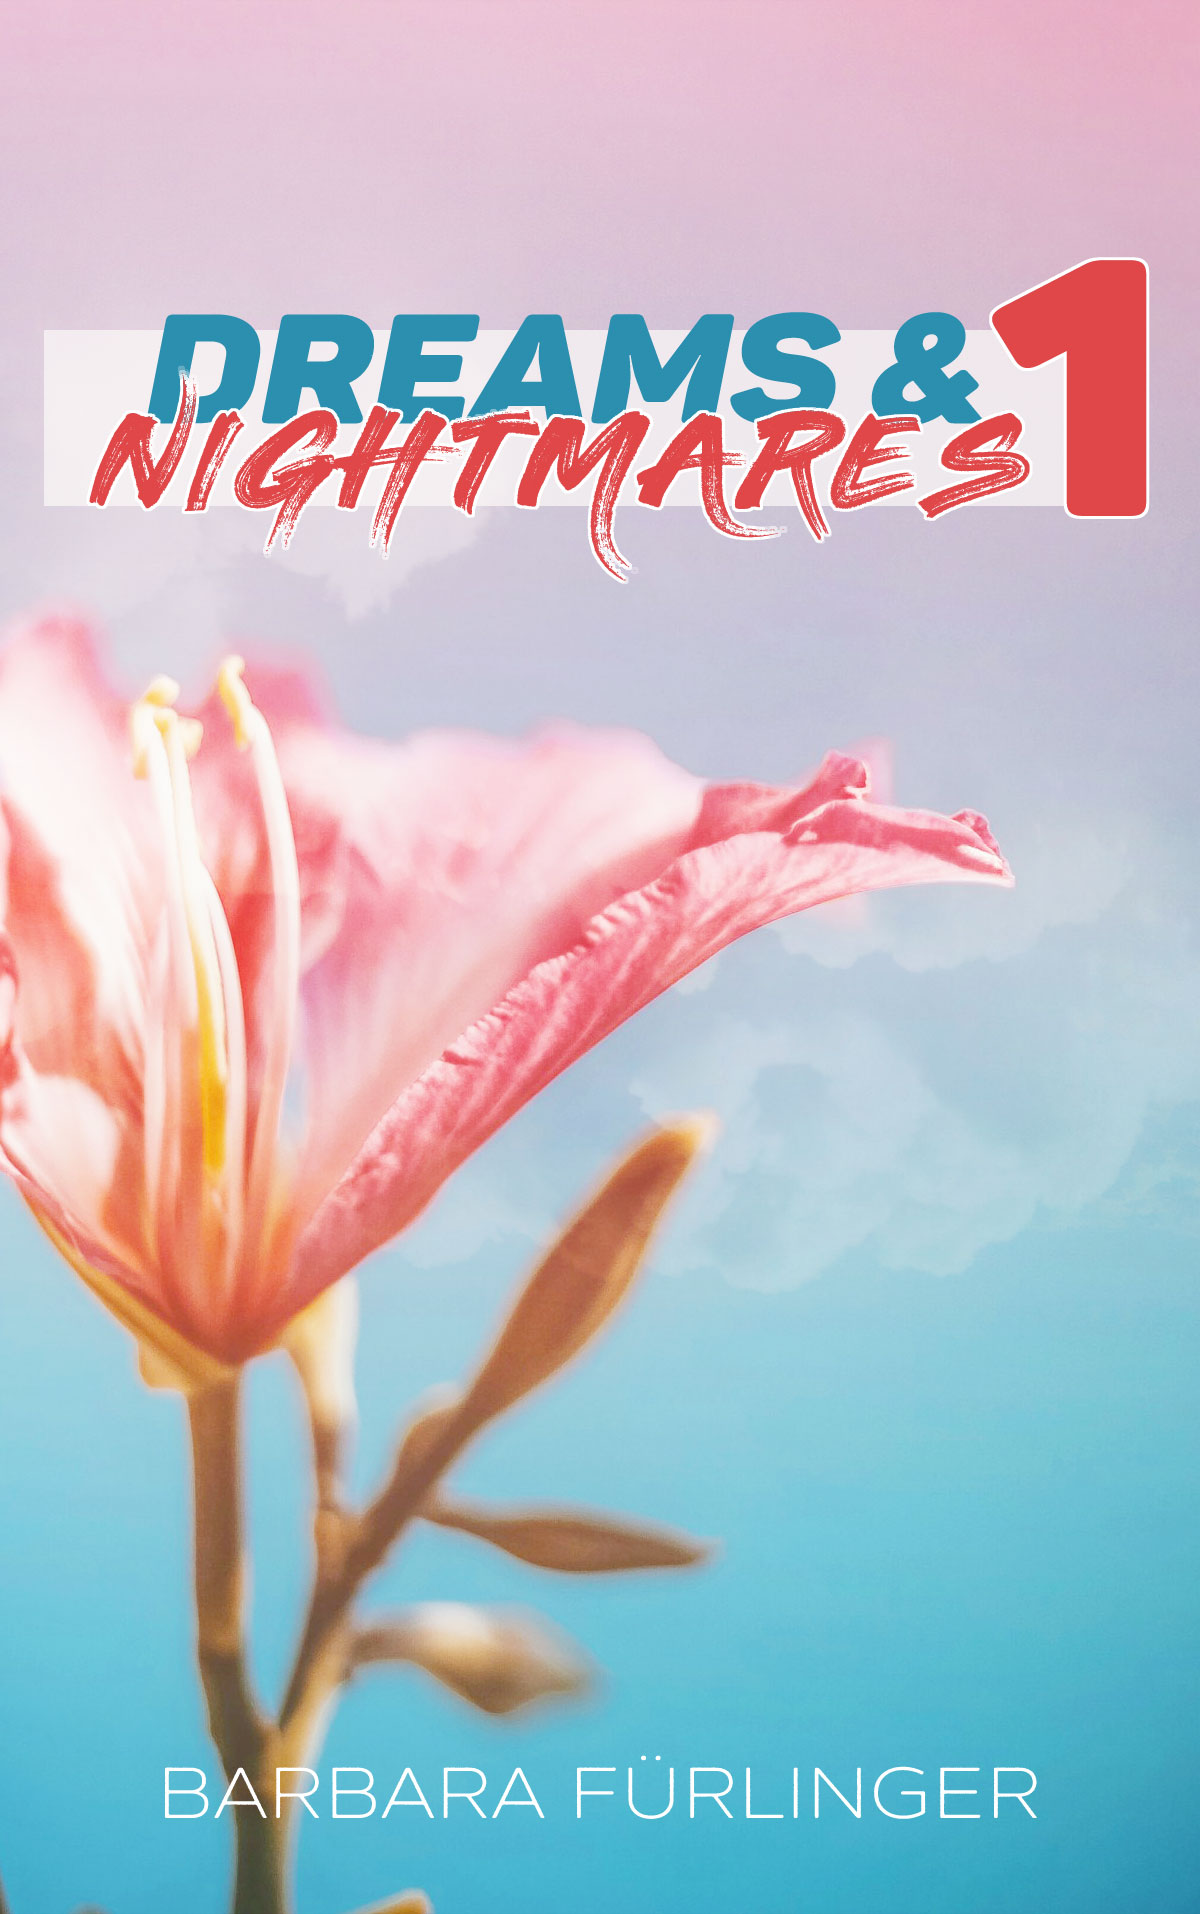 Dreams and Nightmares Band 1